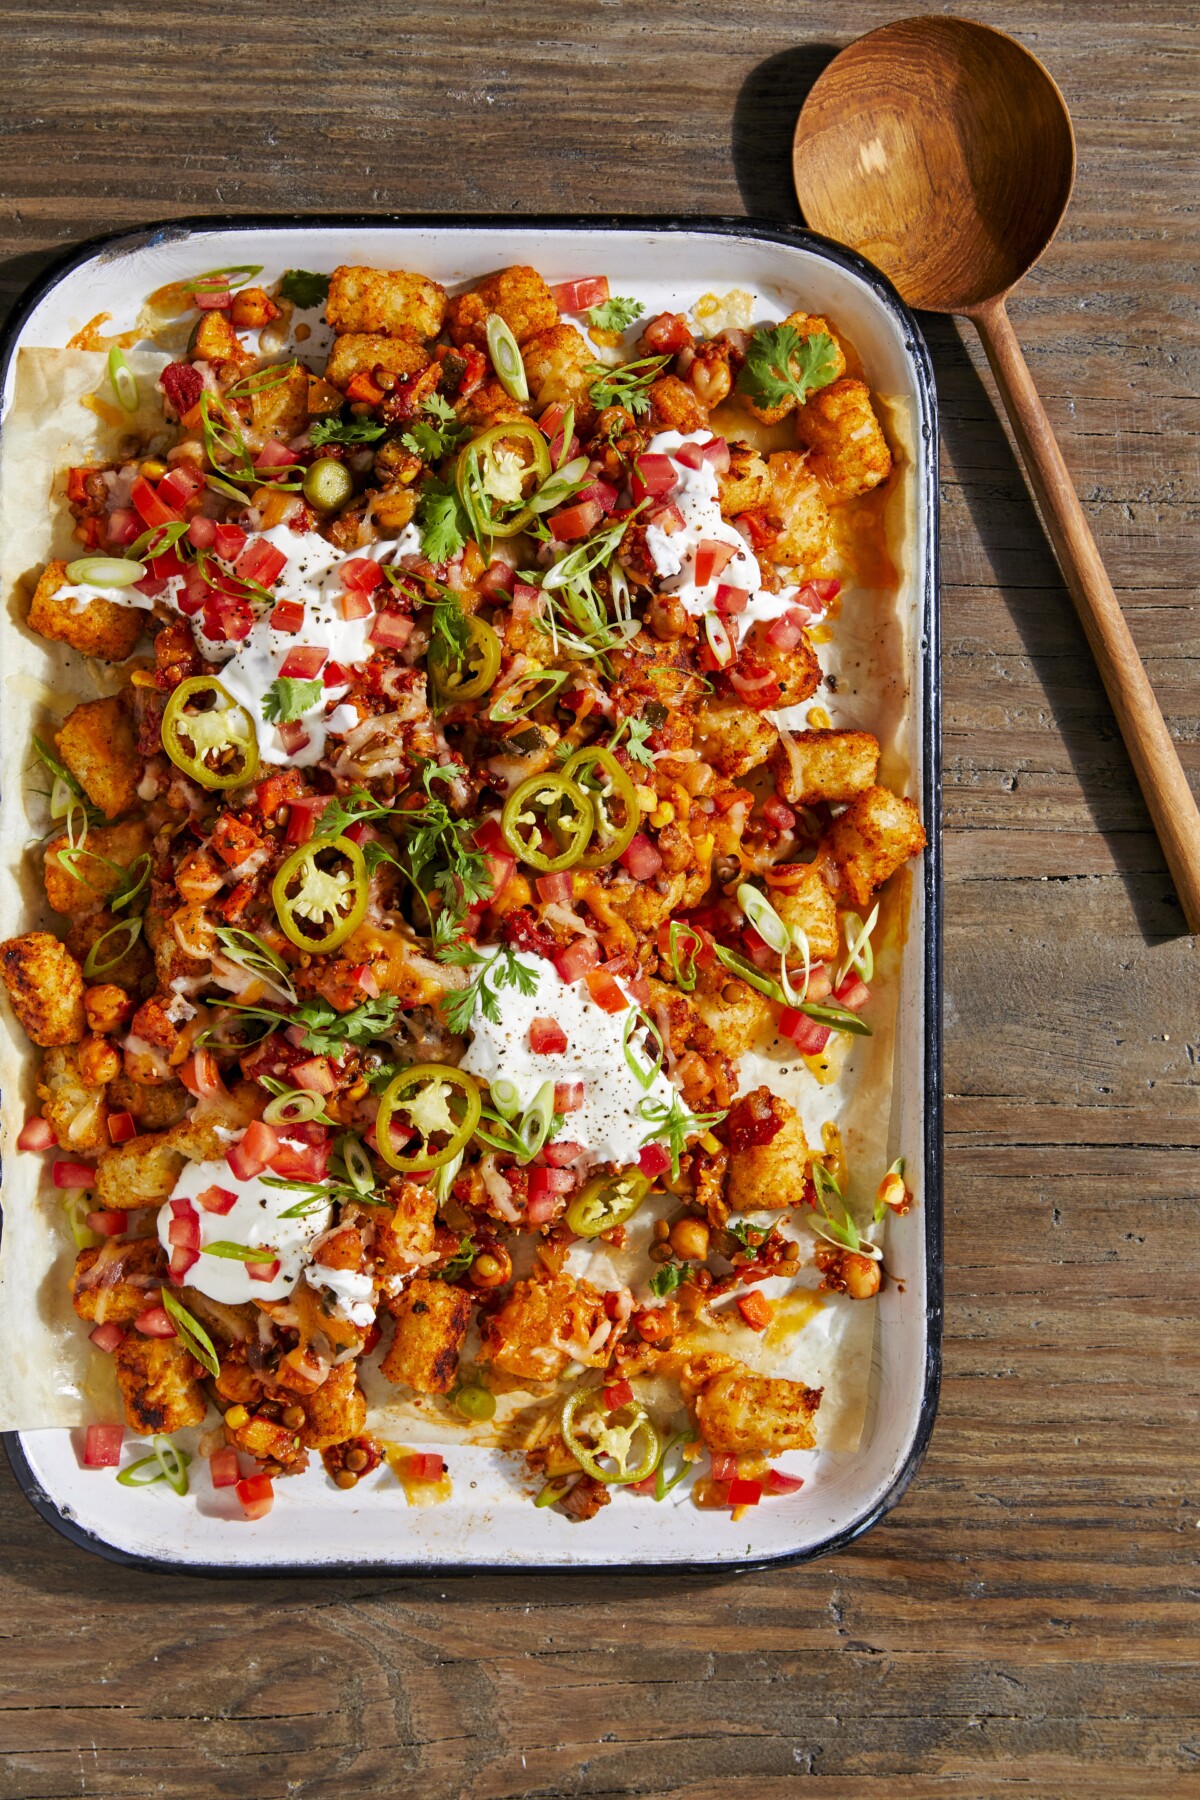 A large rectangle casserole pan, filled with tater tot nachos topped with sour cream, tomatoes, sour cream, and jalapeños. A wooden serving spoon lays beside the dish.